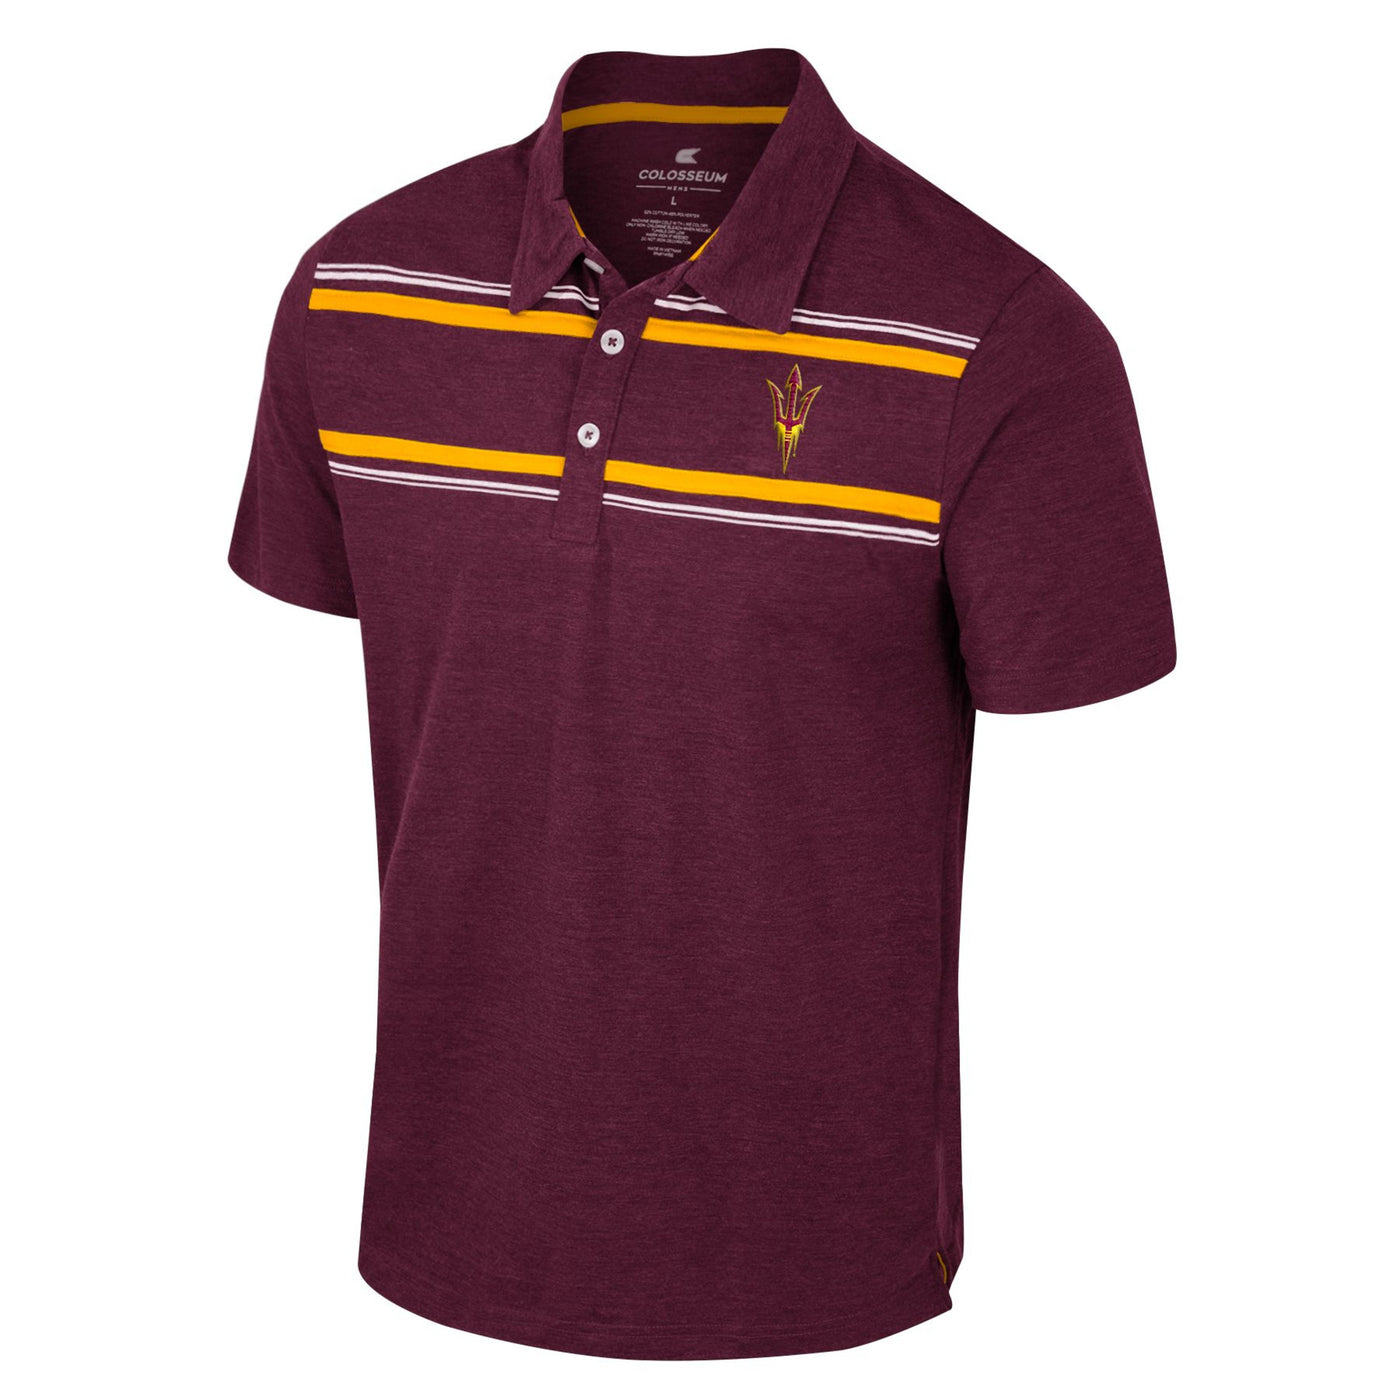 ASU maroon mens Polo with a series of gold and white stripes along the chest. In between the two stripe patterns is a Pitchfork logo on one side of the chest.